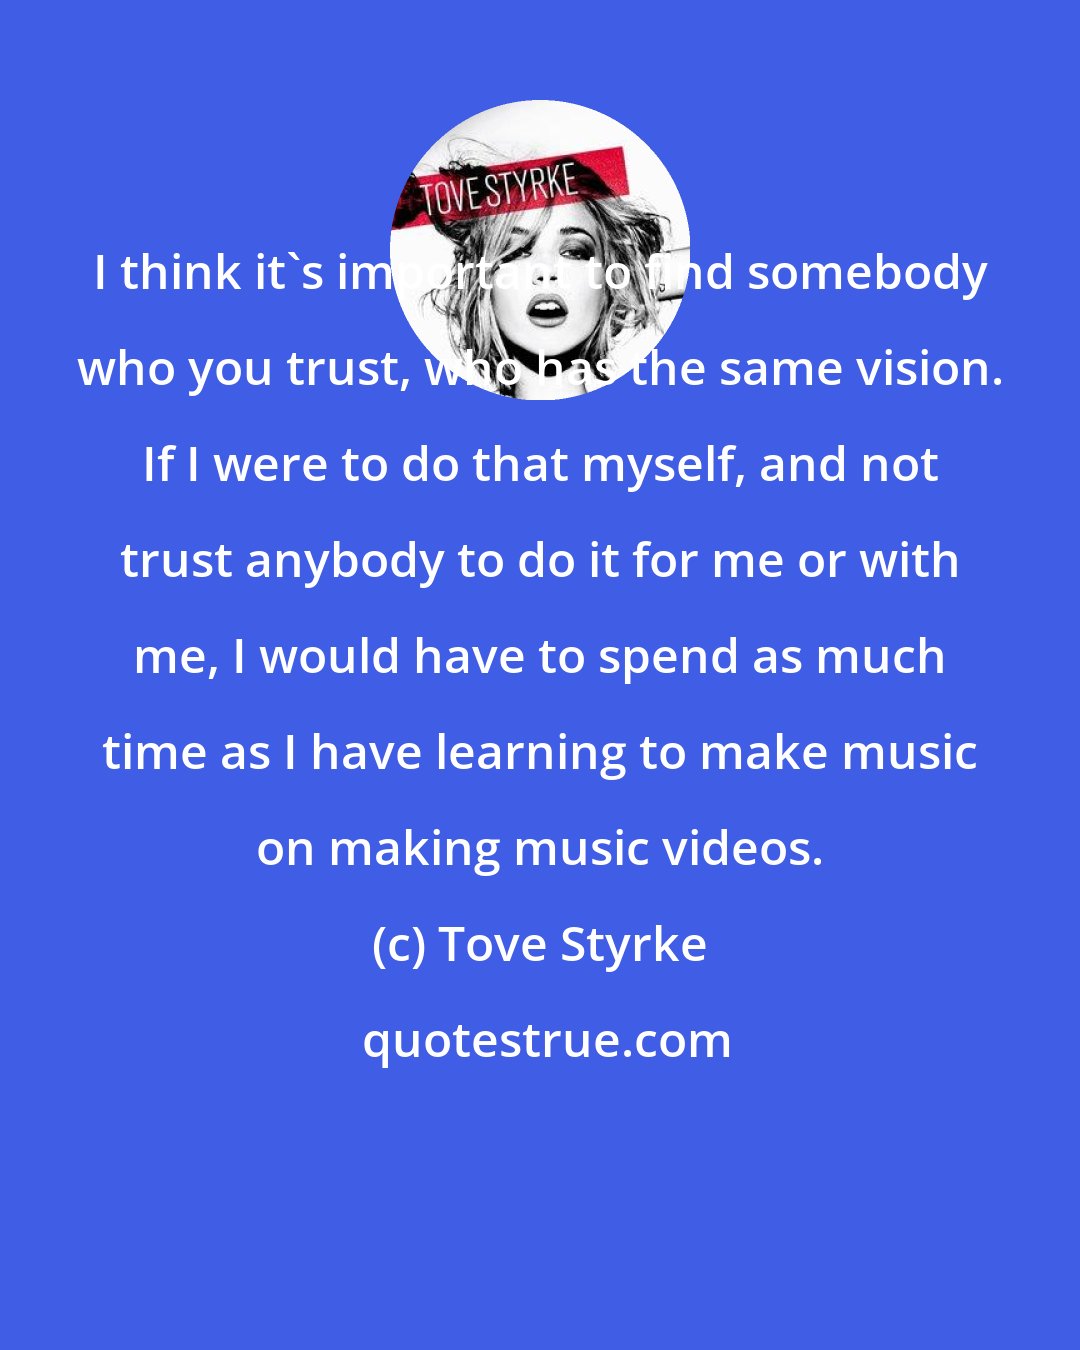 Tove Styrke: I think it's important to find somebody who you trust, who has the same vision. If I were to do that myself, and not trust anybody to do it for me or with me, I would have to spend as much time as I have learning to make music on making music videos.